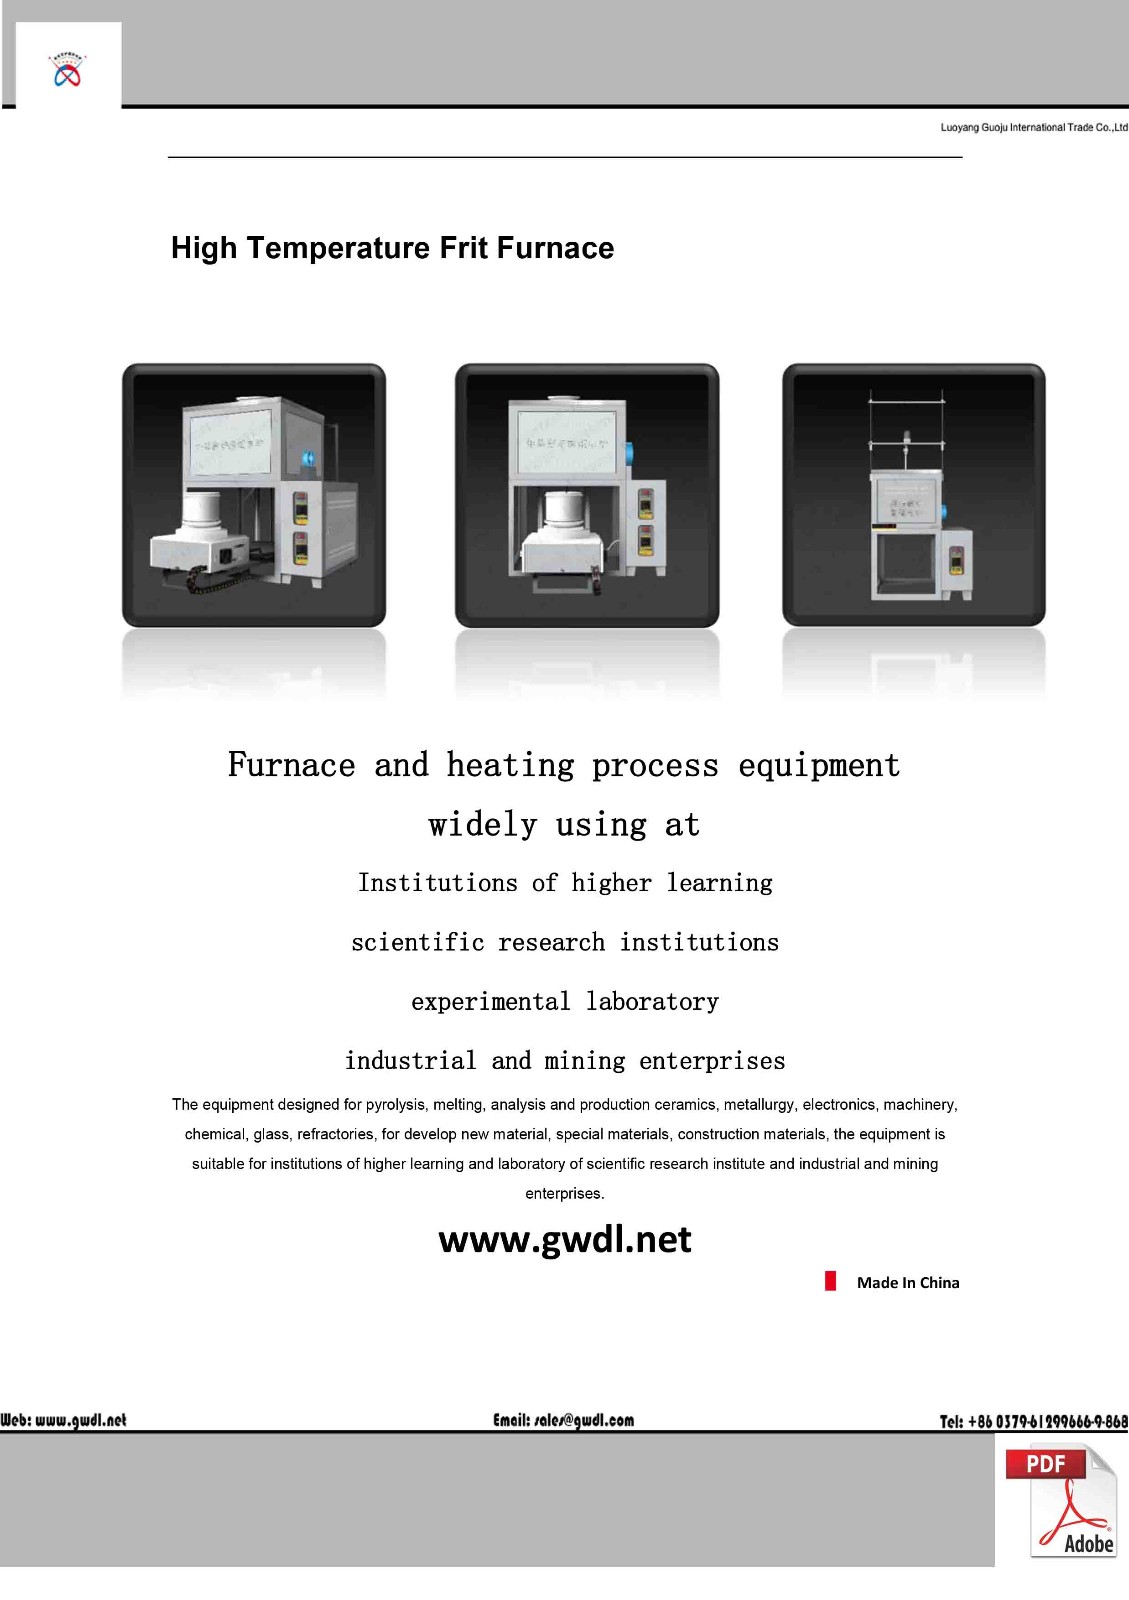 High Temperature Glass Melting Furnace With Agitation System (GWL-RJ)